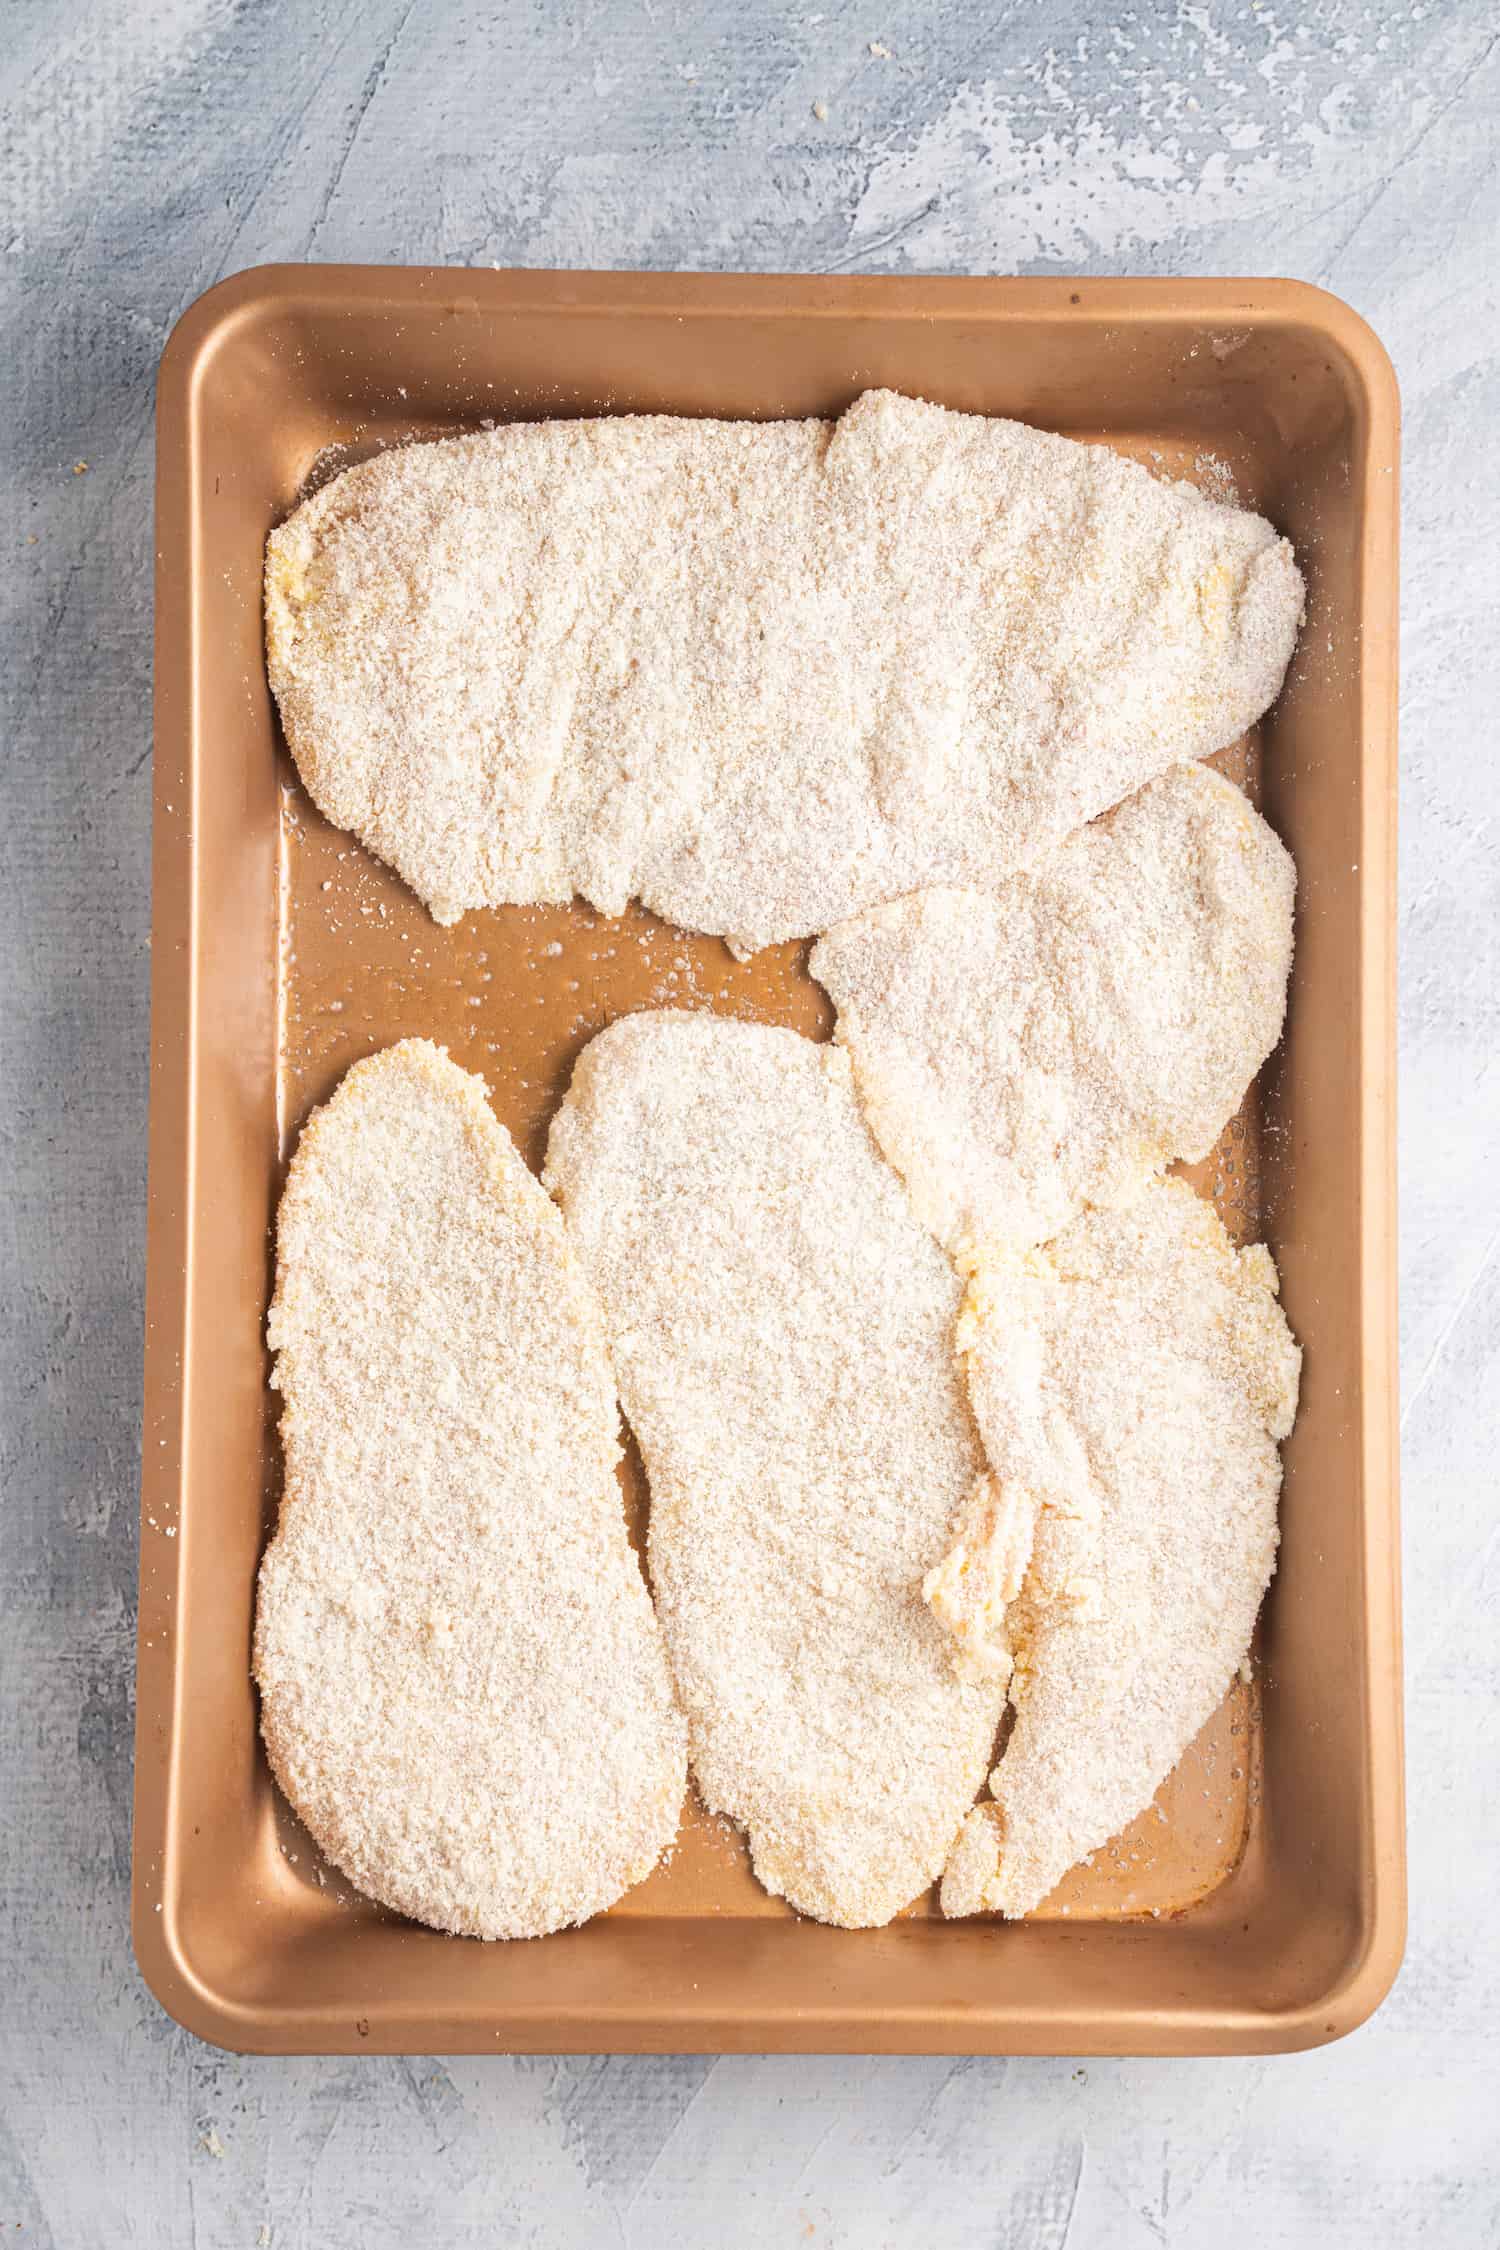 Breaded chicken fillets on a baking tray ready to be baked.